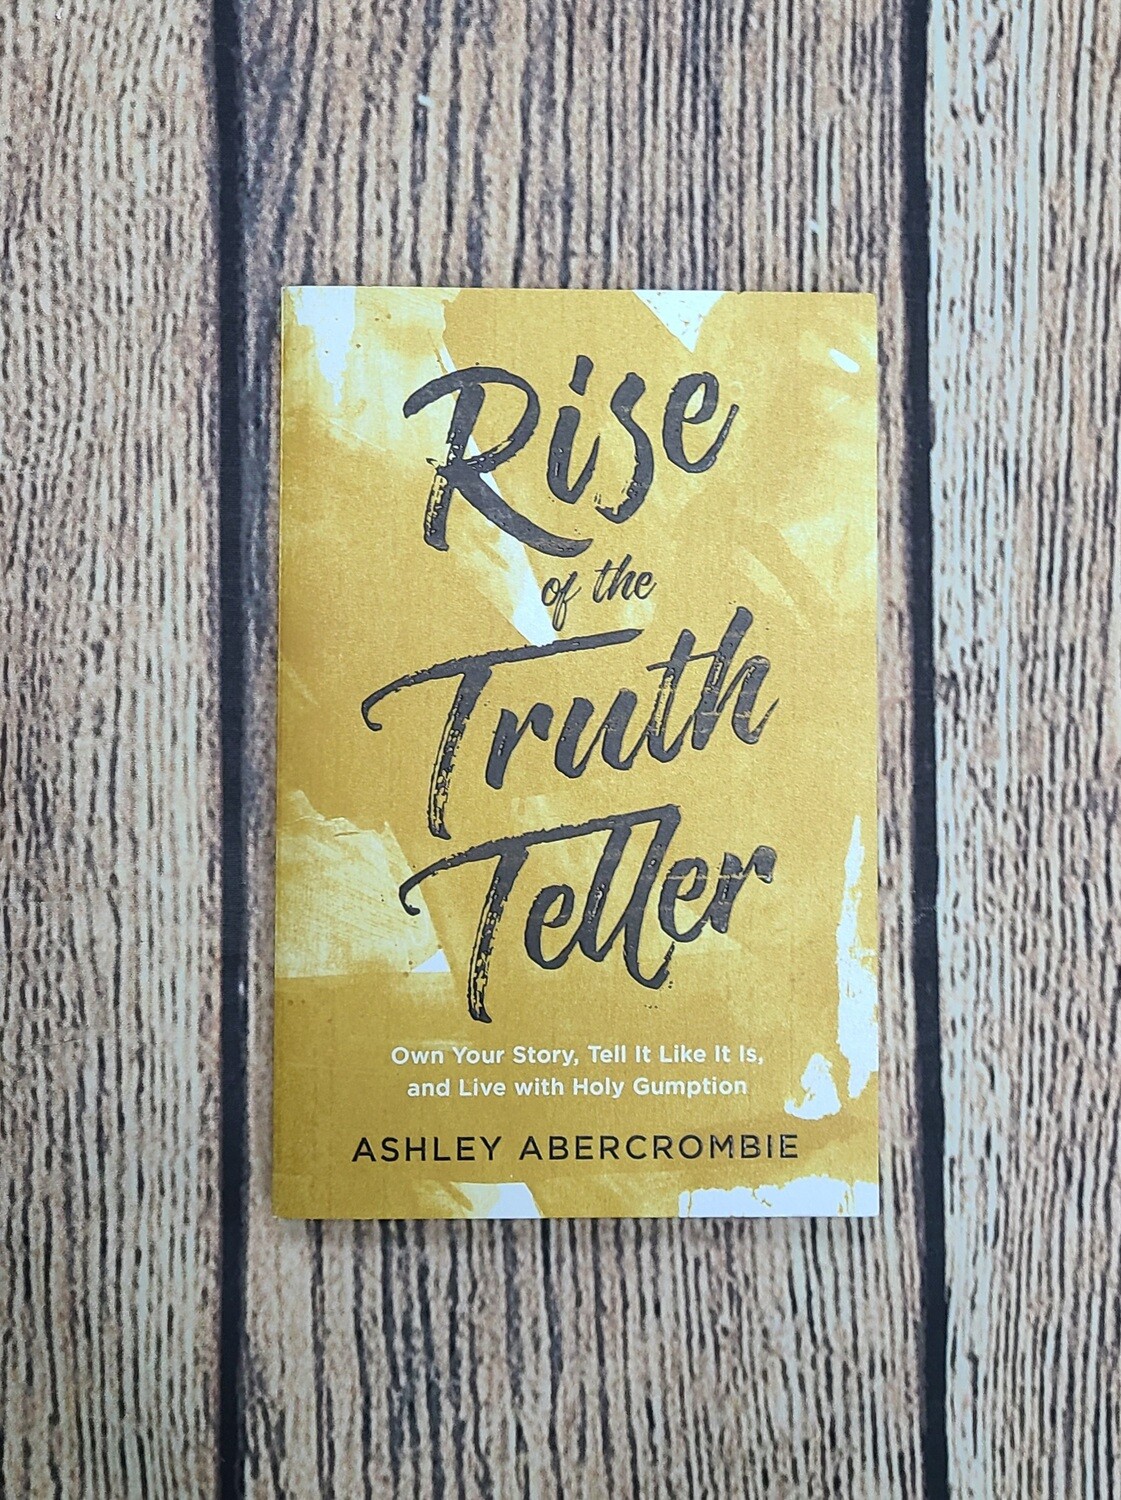 Rise of the Truth Teller: Own Your Story, Tell it Like it is, and Live with Holy Gumption by Ashley Abercrombie